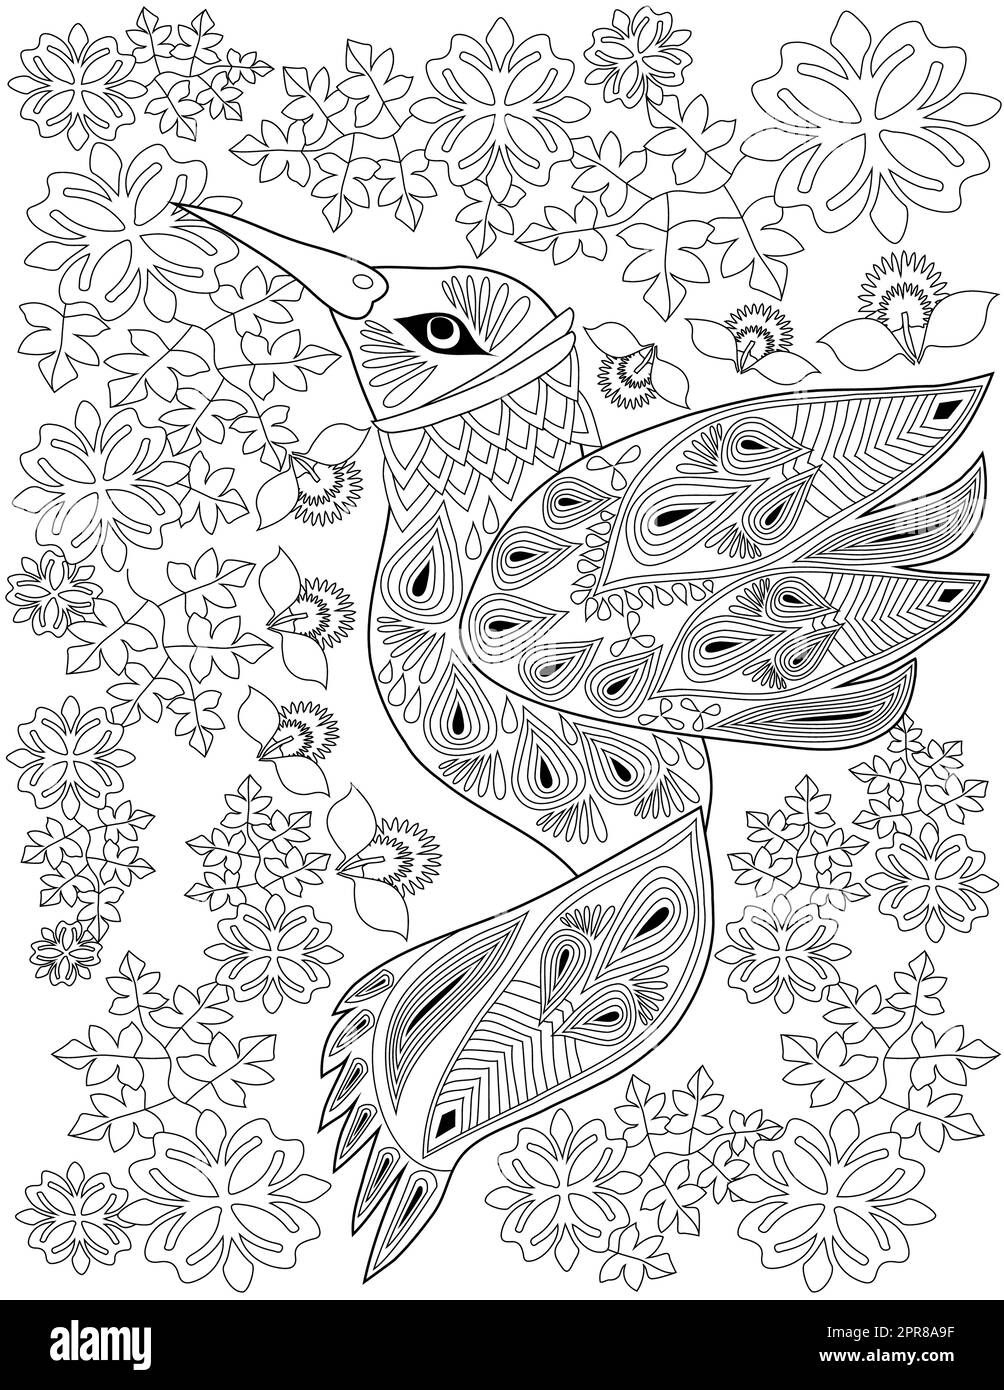 Veronica | Adult coloring pages | Premium coloring pages | Grayscale Page  |Instant Download |A4,A3 Printable |Printable Coloring Page